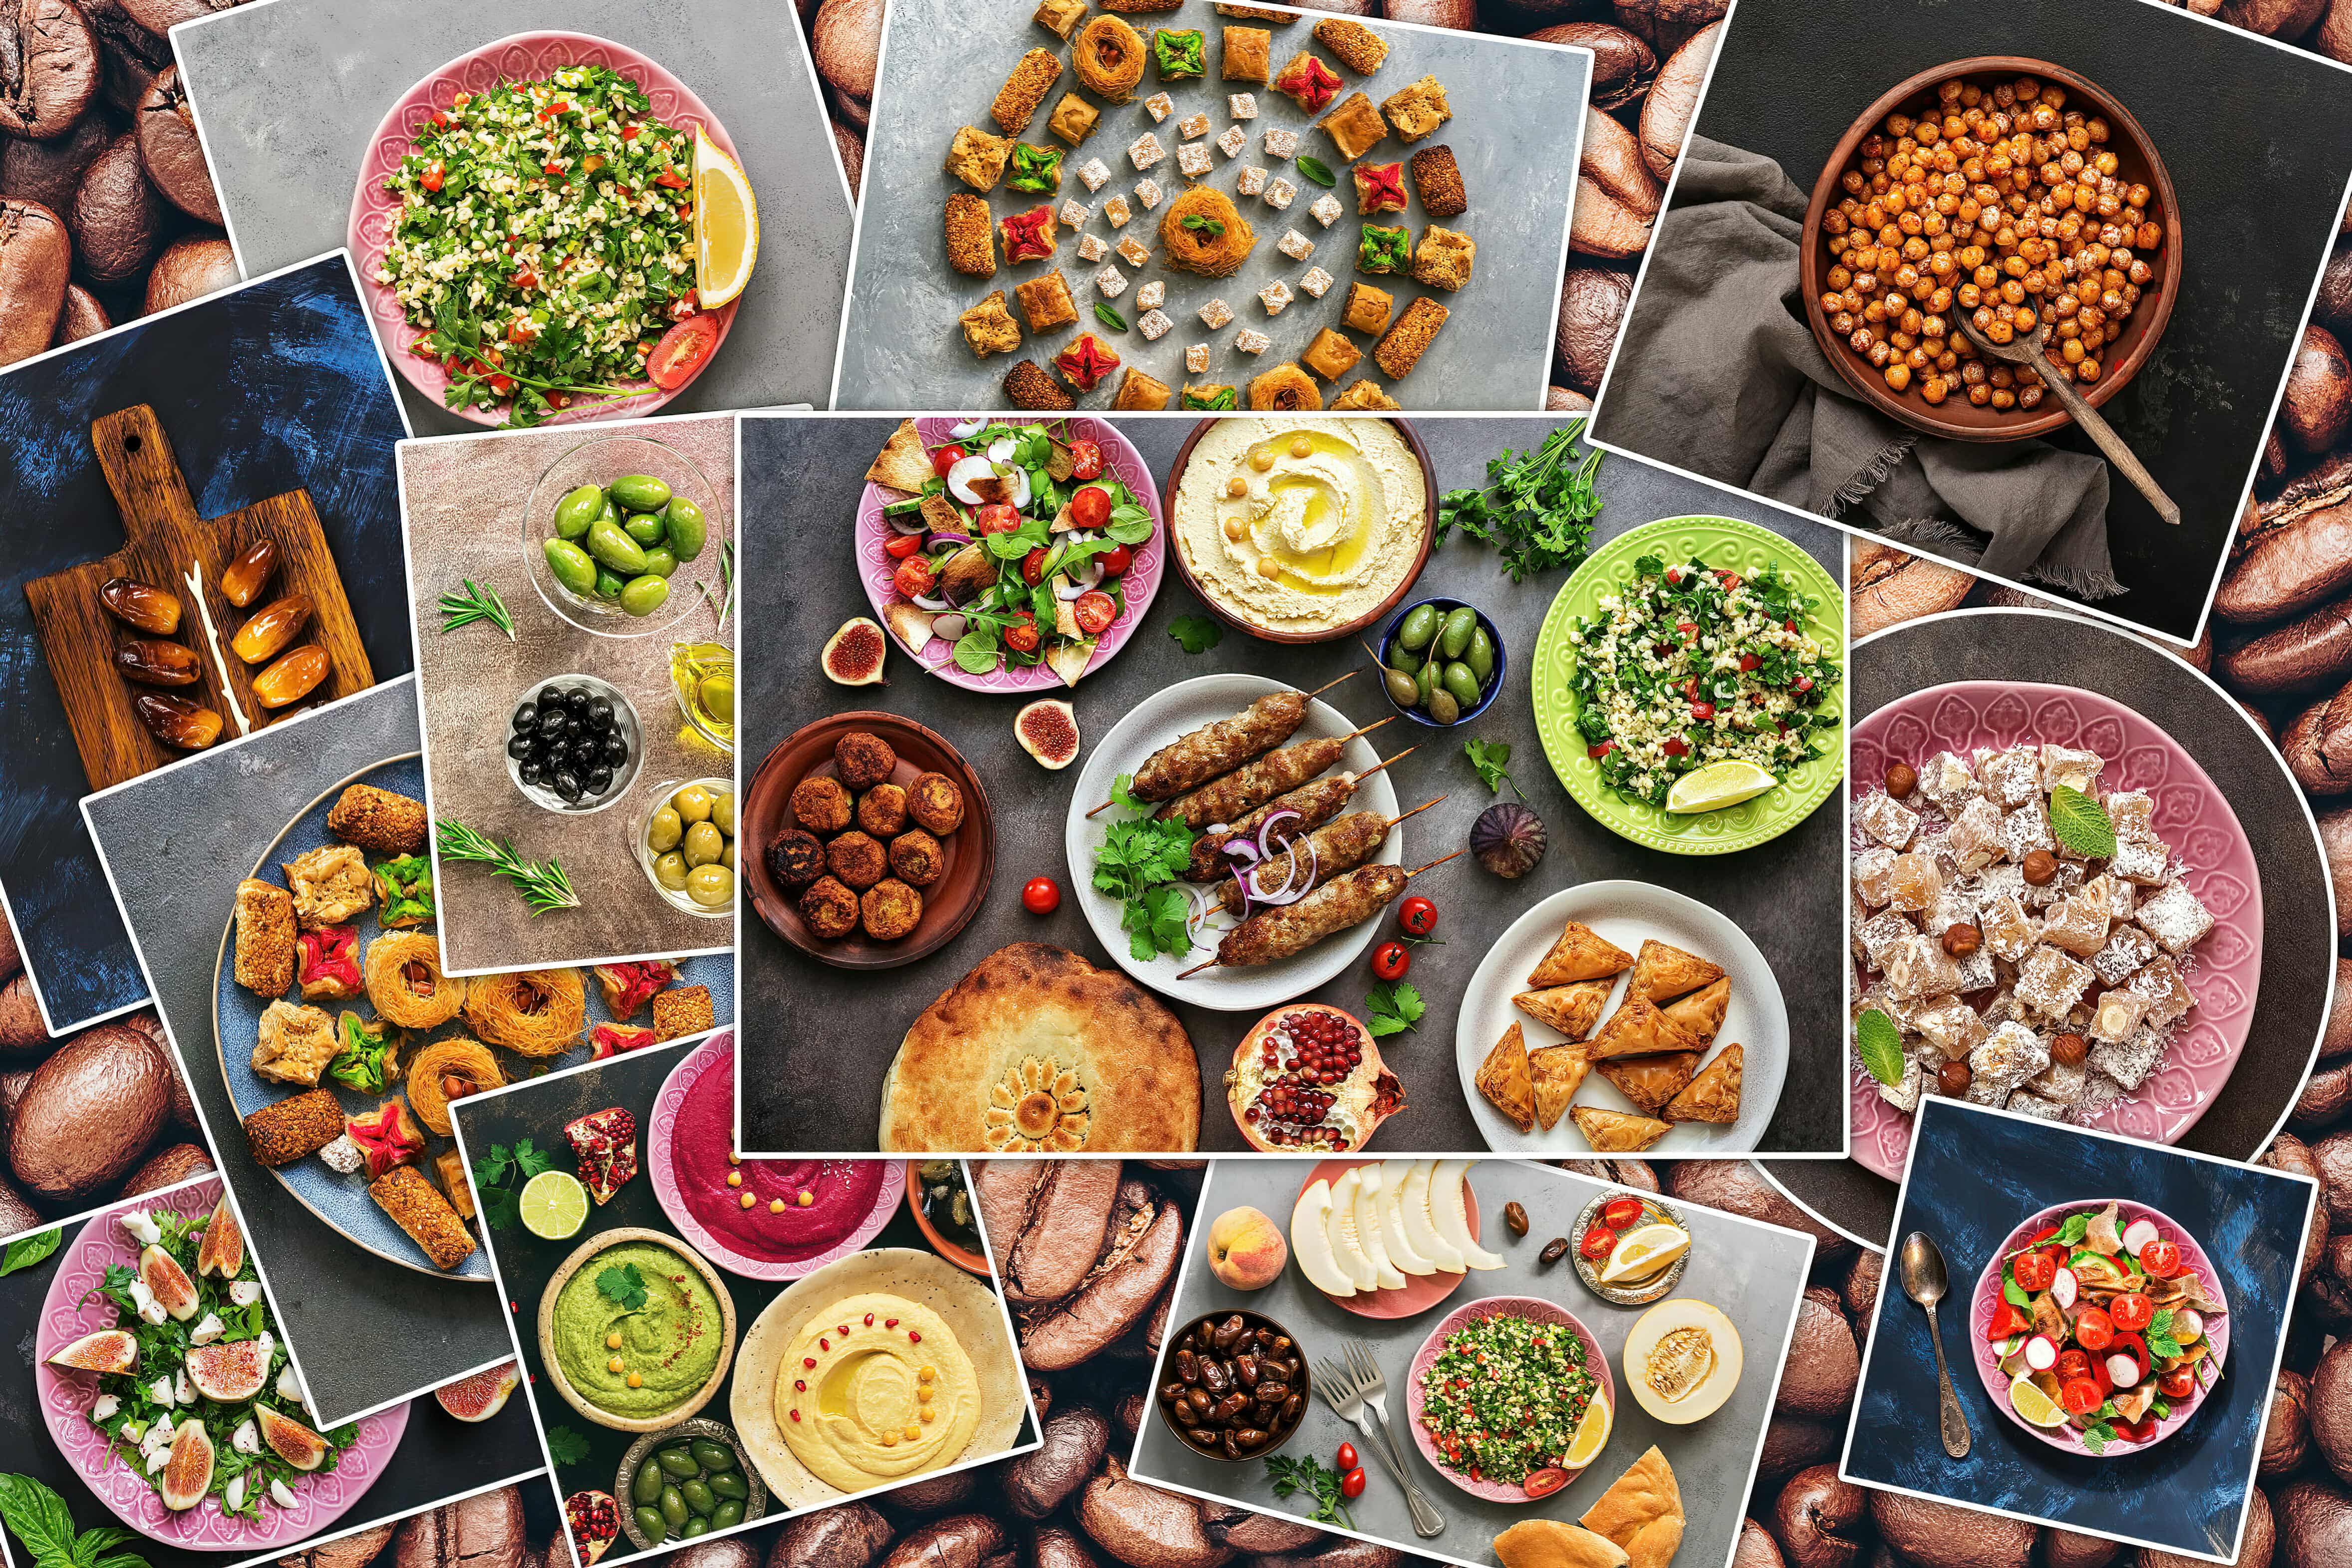 Collage of various traditional Arabic and Middle Eastern food